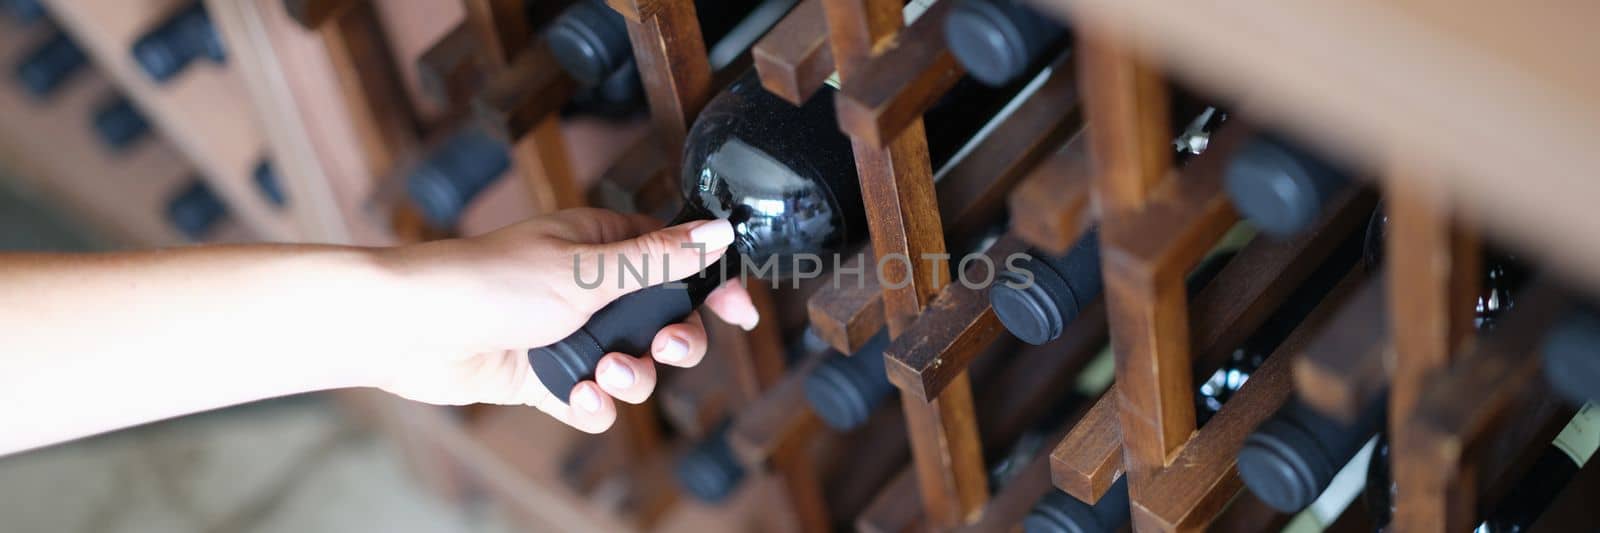 Woman chooses bottle of wine in cellar closeup by kuprevich